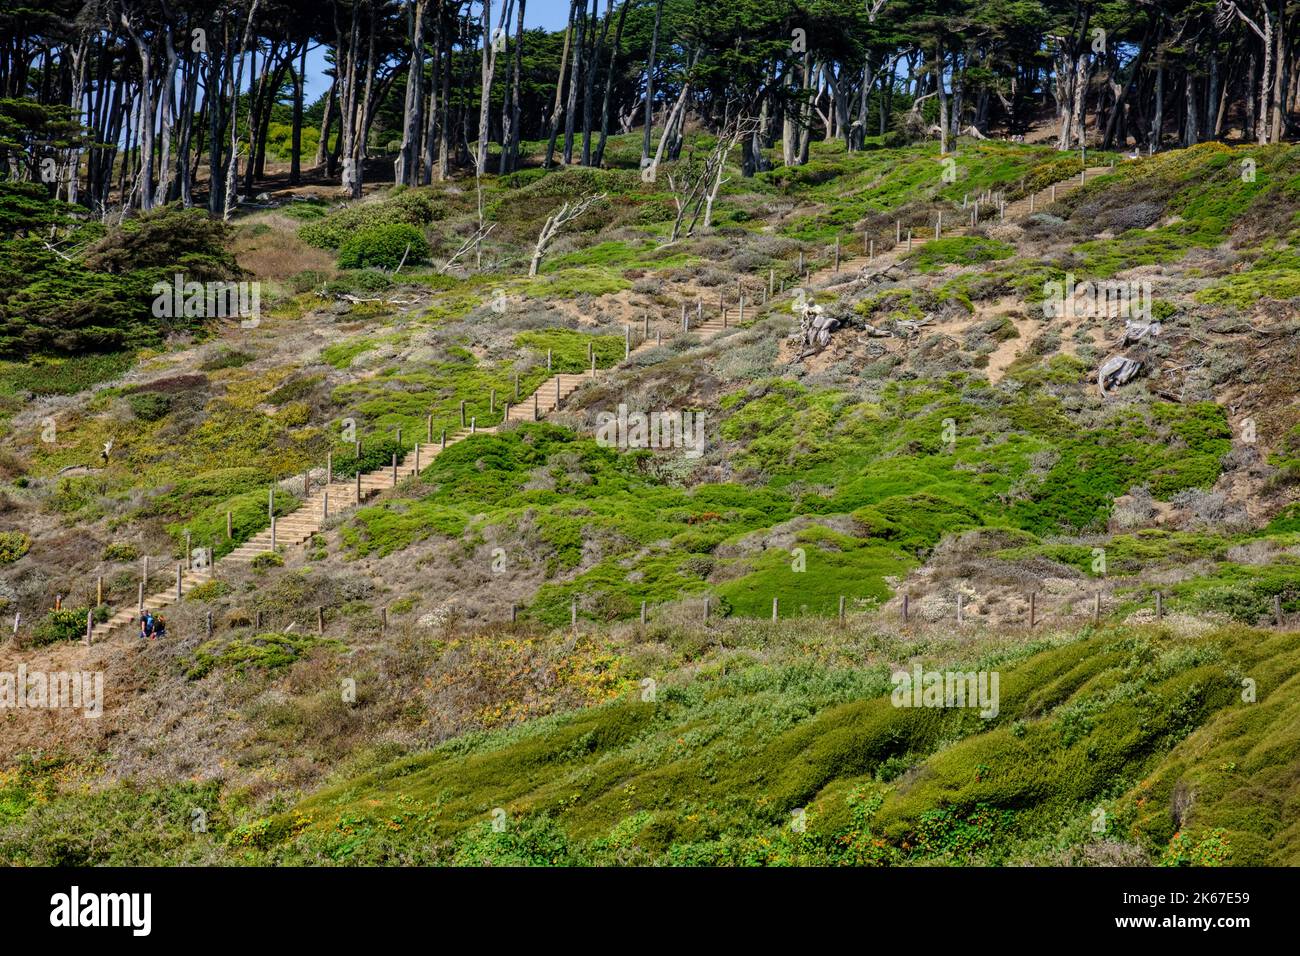 Staircase of 243 steps at Lands End, Northwest San Francisco, framed with Monterey pine trees and shrubs, leads down to Mile Rock Beach. Stock Photo